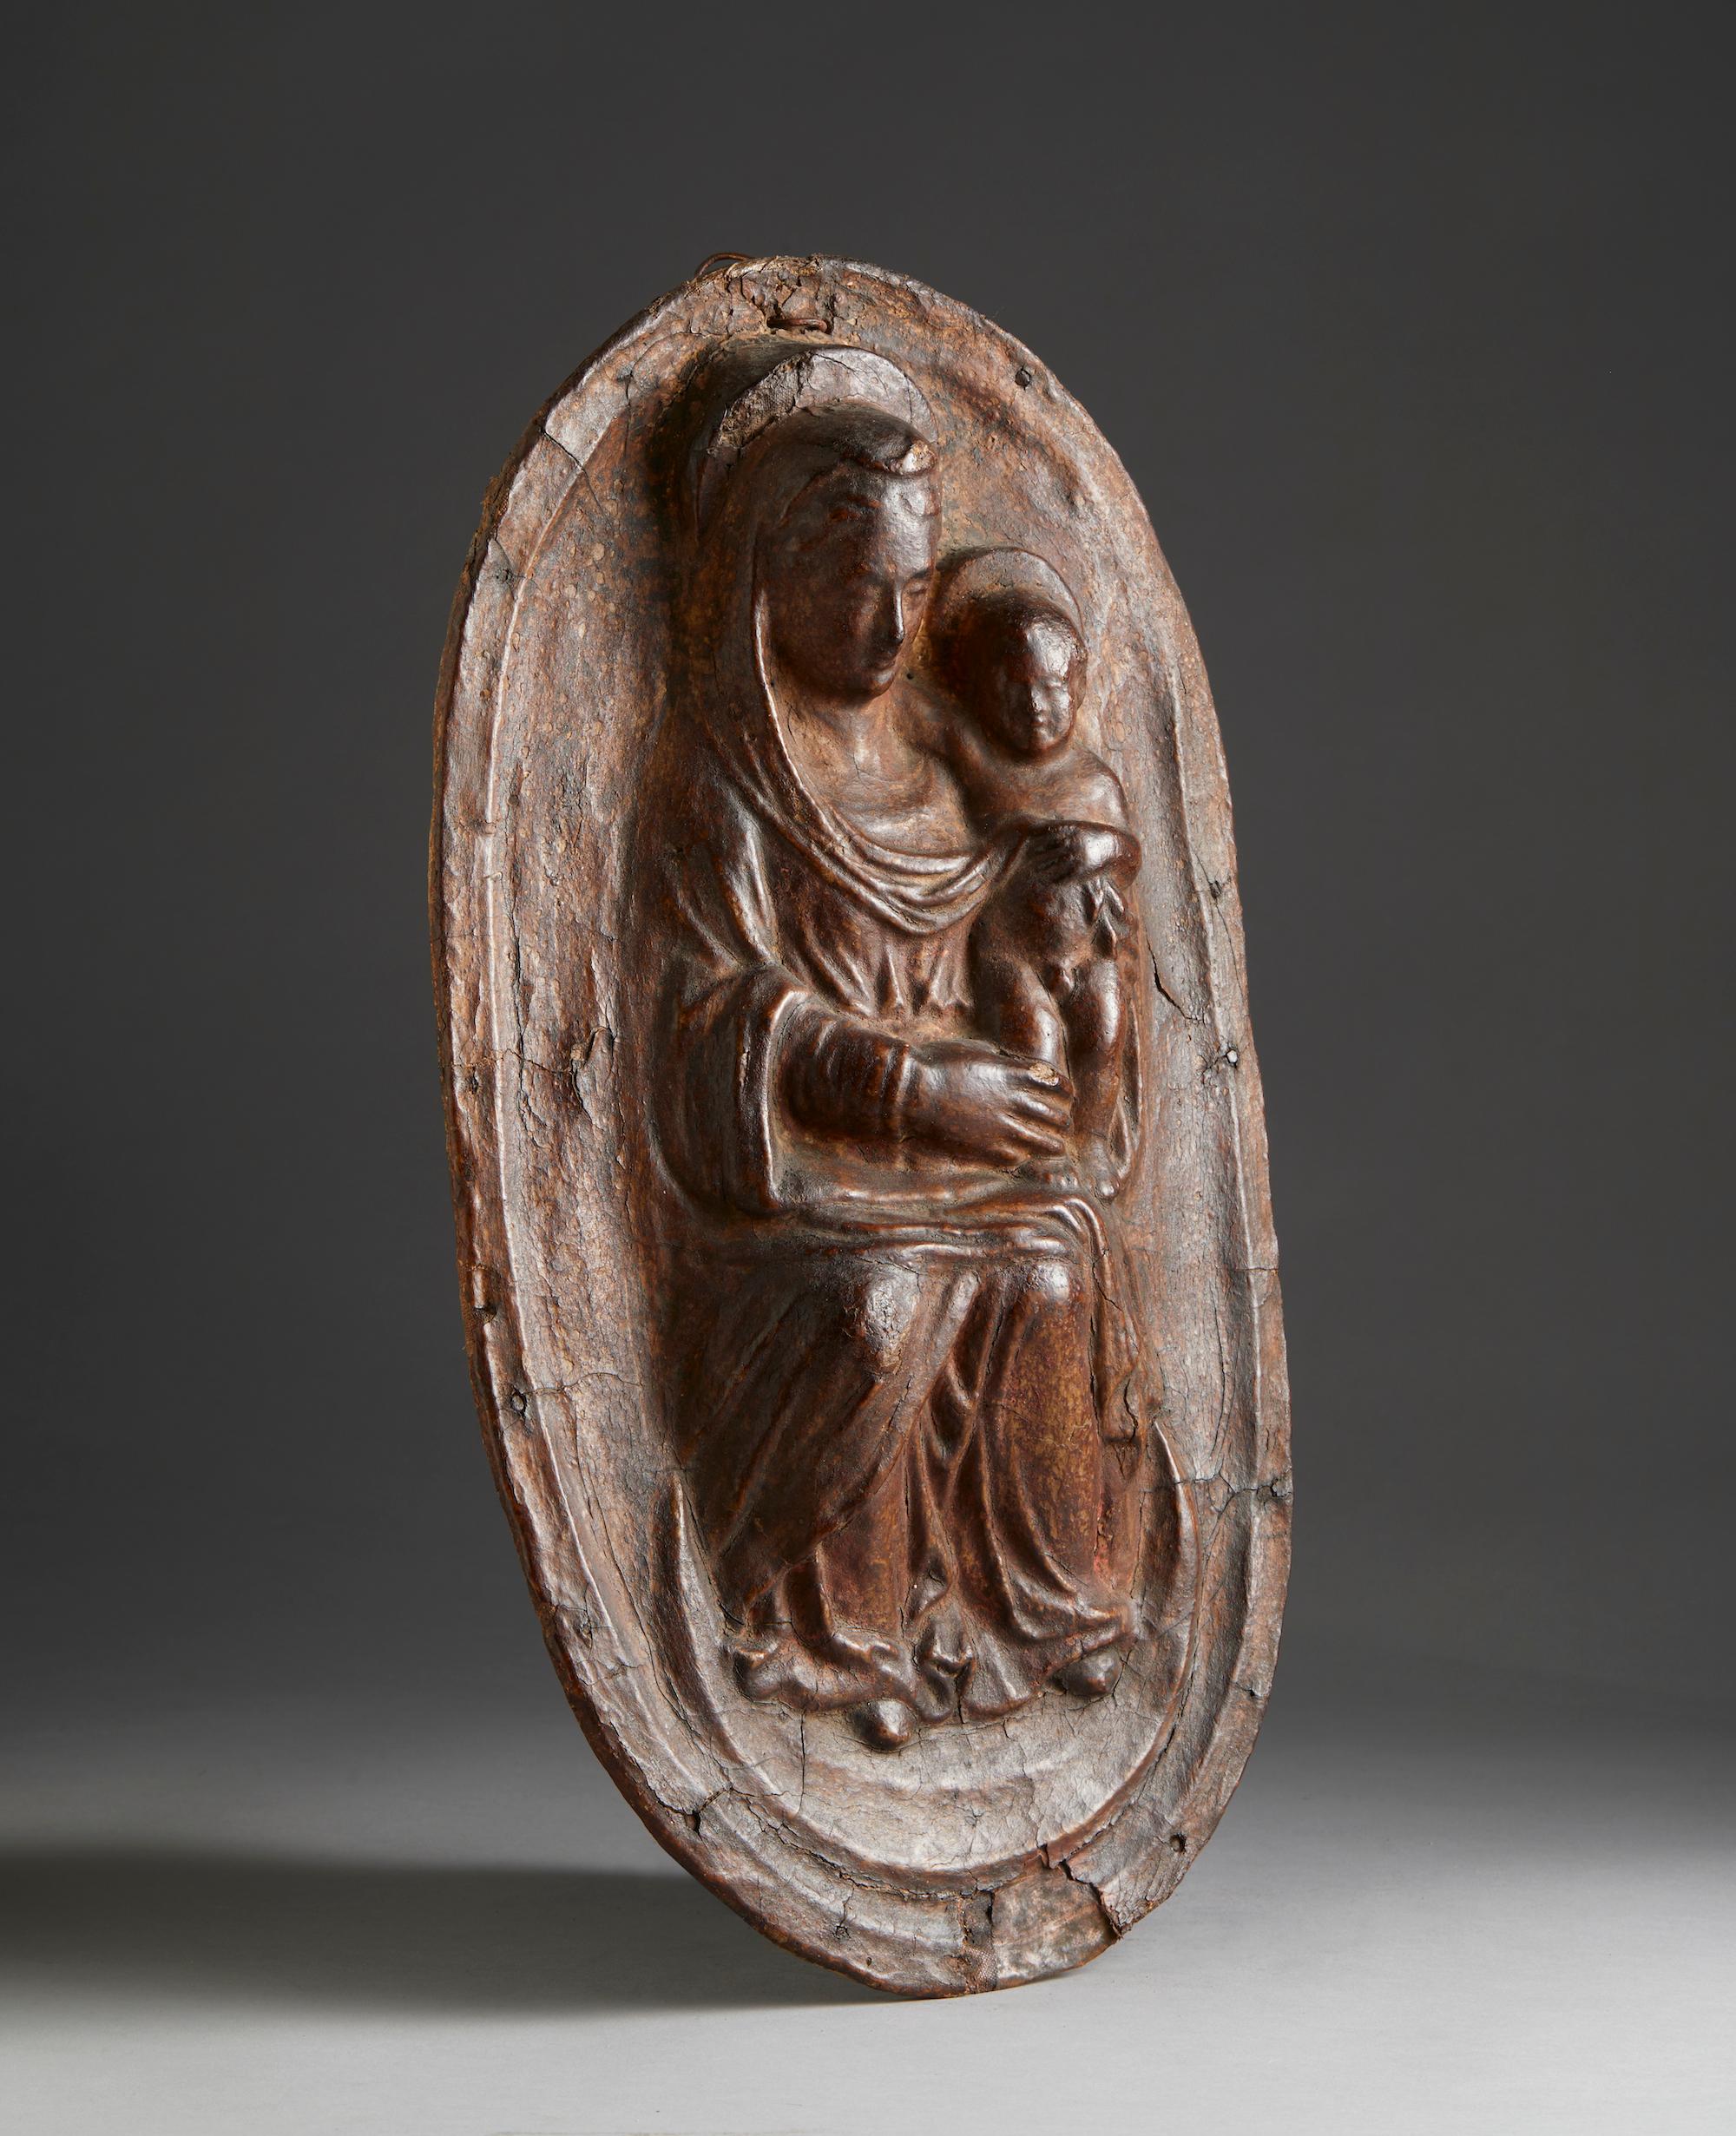 Madonnna with Child

Leather relief depicting Madonna Enthroned with Child on her lap.

Formerly encased and fixed on a papier background.

Visible beneath the surface patina are traces of ancient gilding.

Emilia, 17th century.

cm 45,2 x 25,4

The